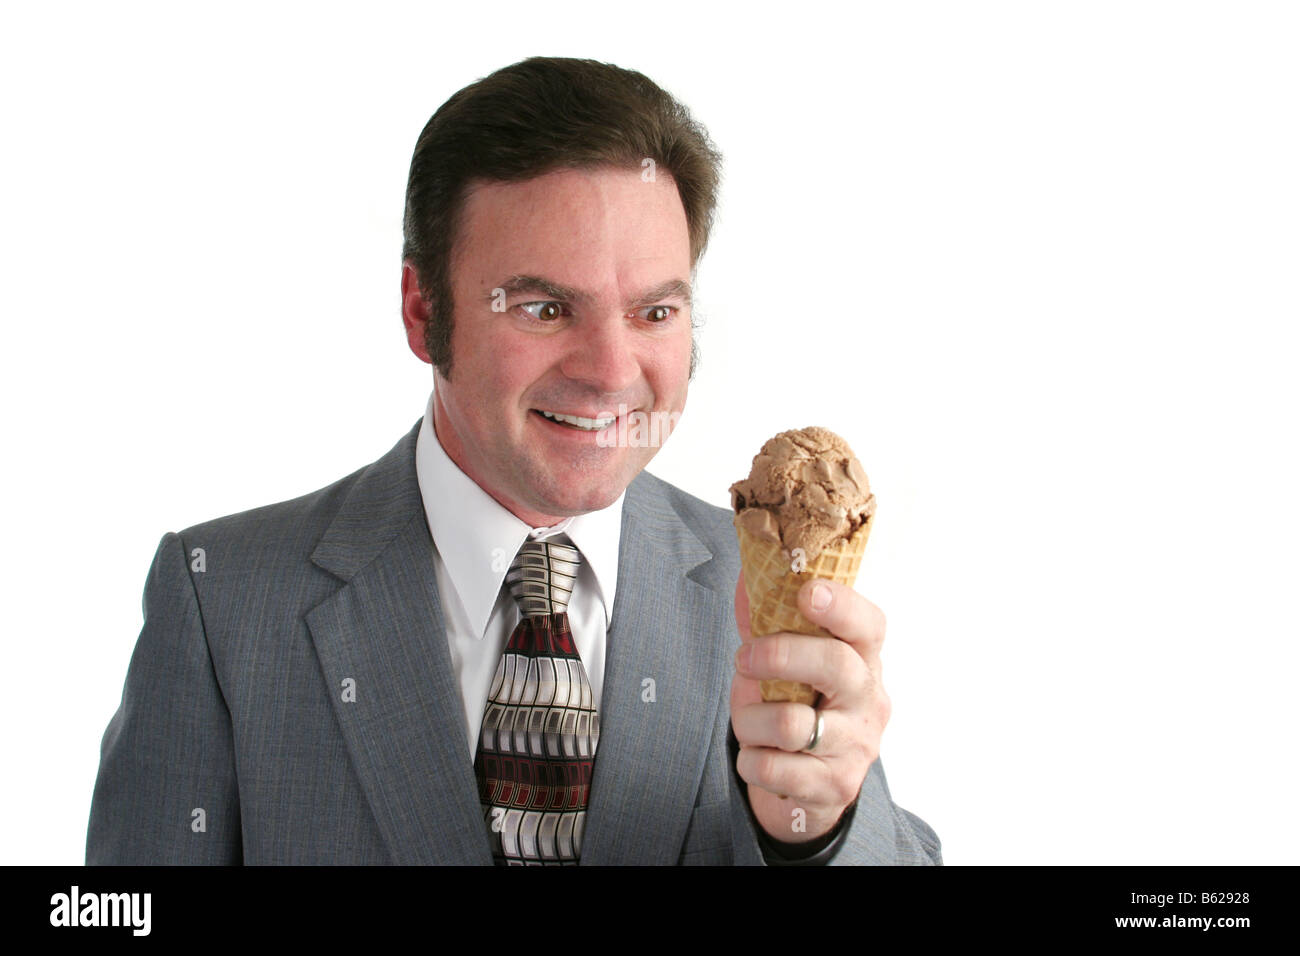 A businessman looking at an ice cream cone with a crazed look Stock Photo